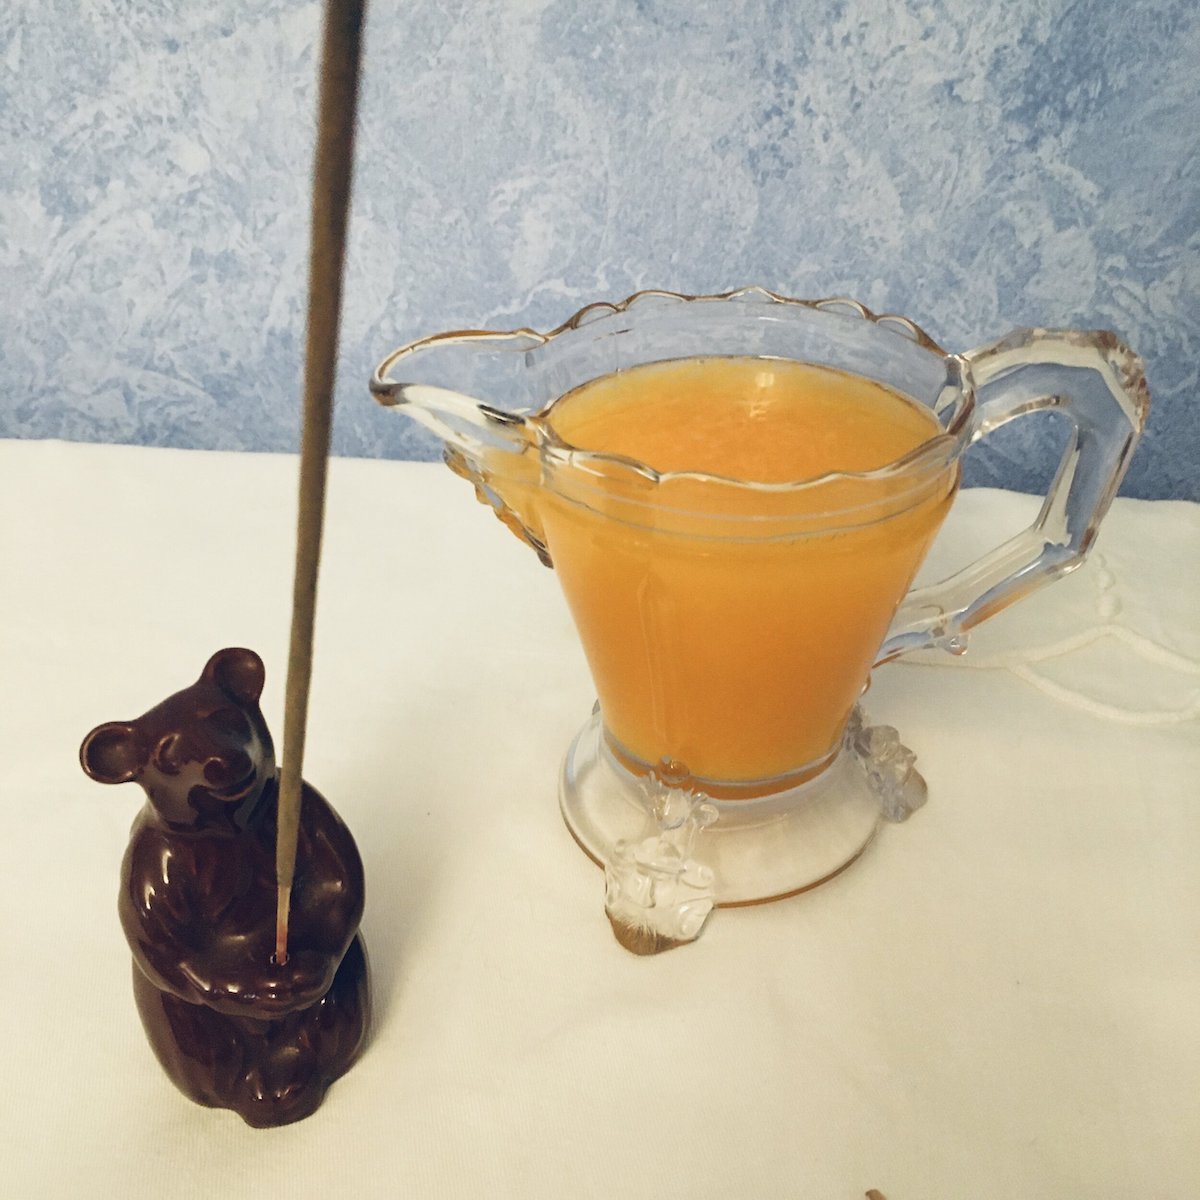 Incense holder and antique glass pitcher